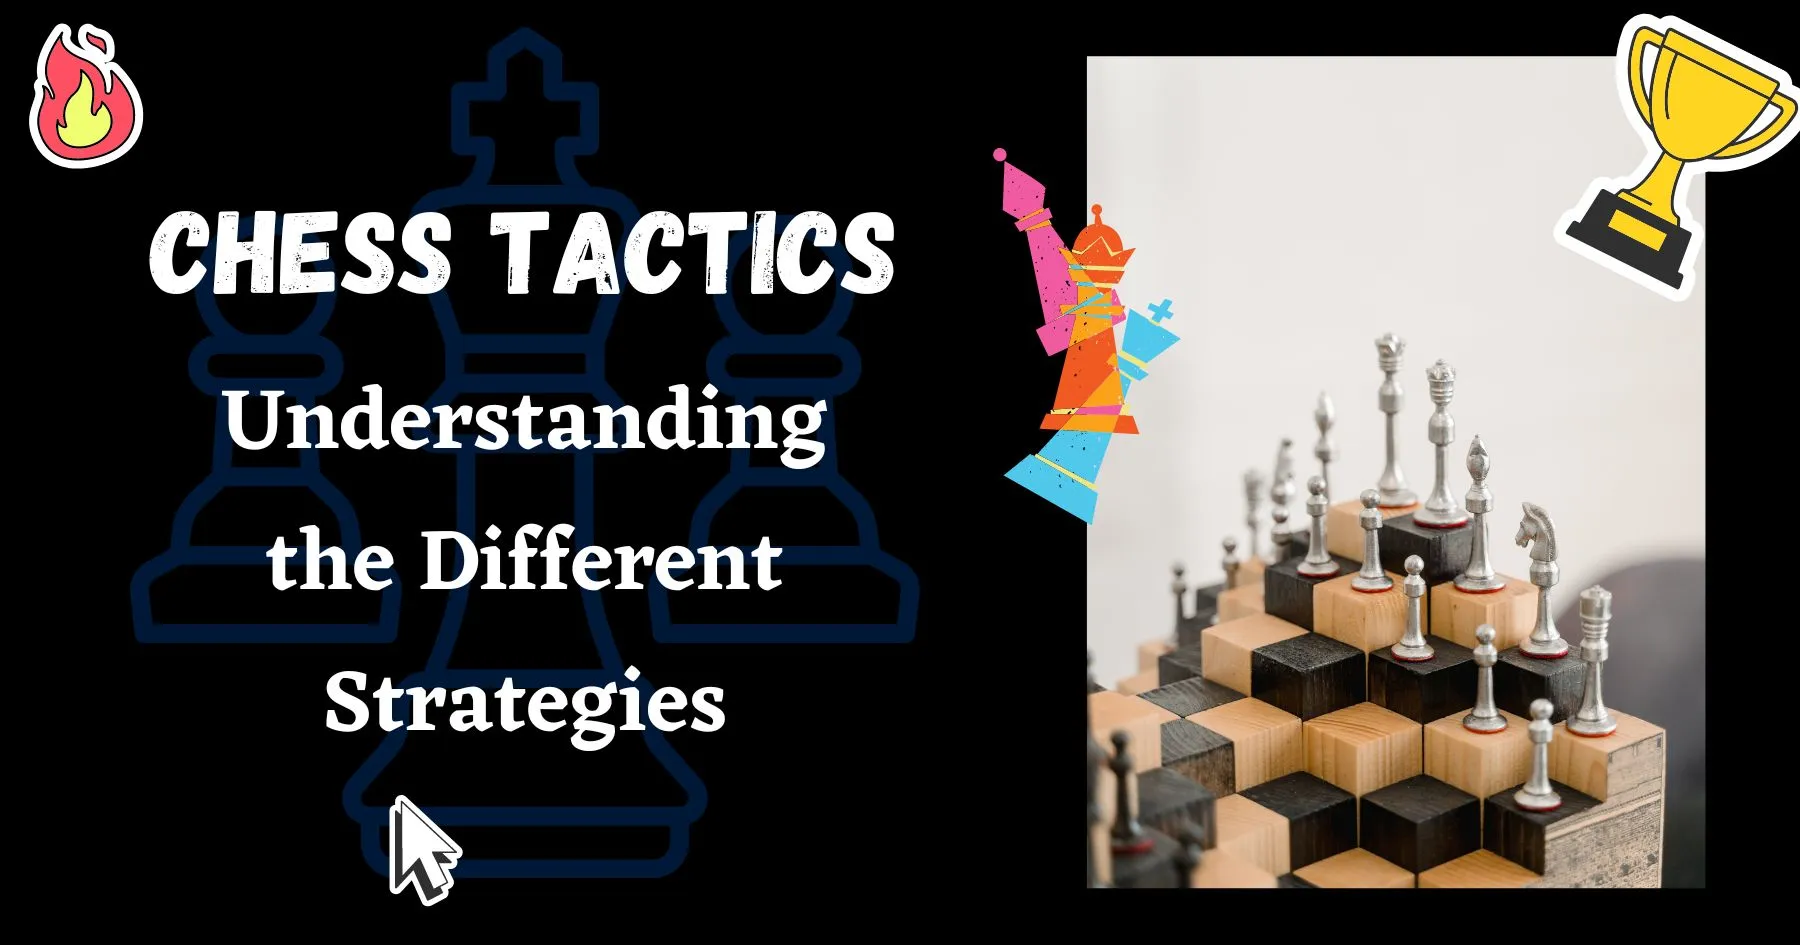 Chess tactics for beginners